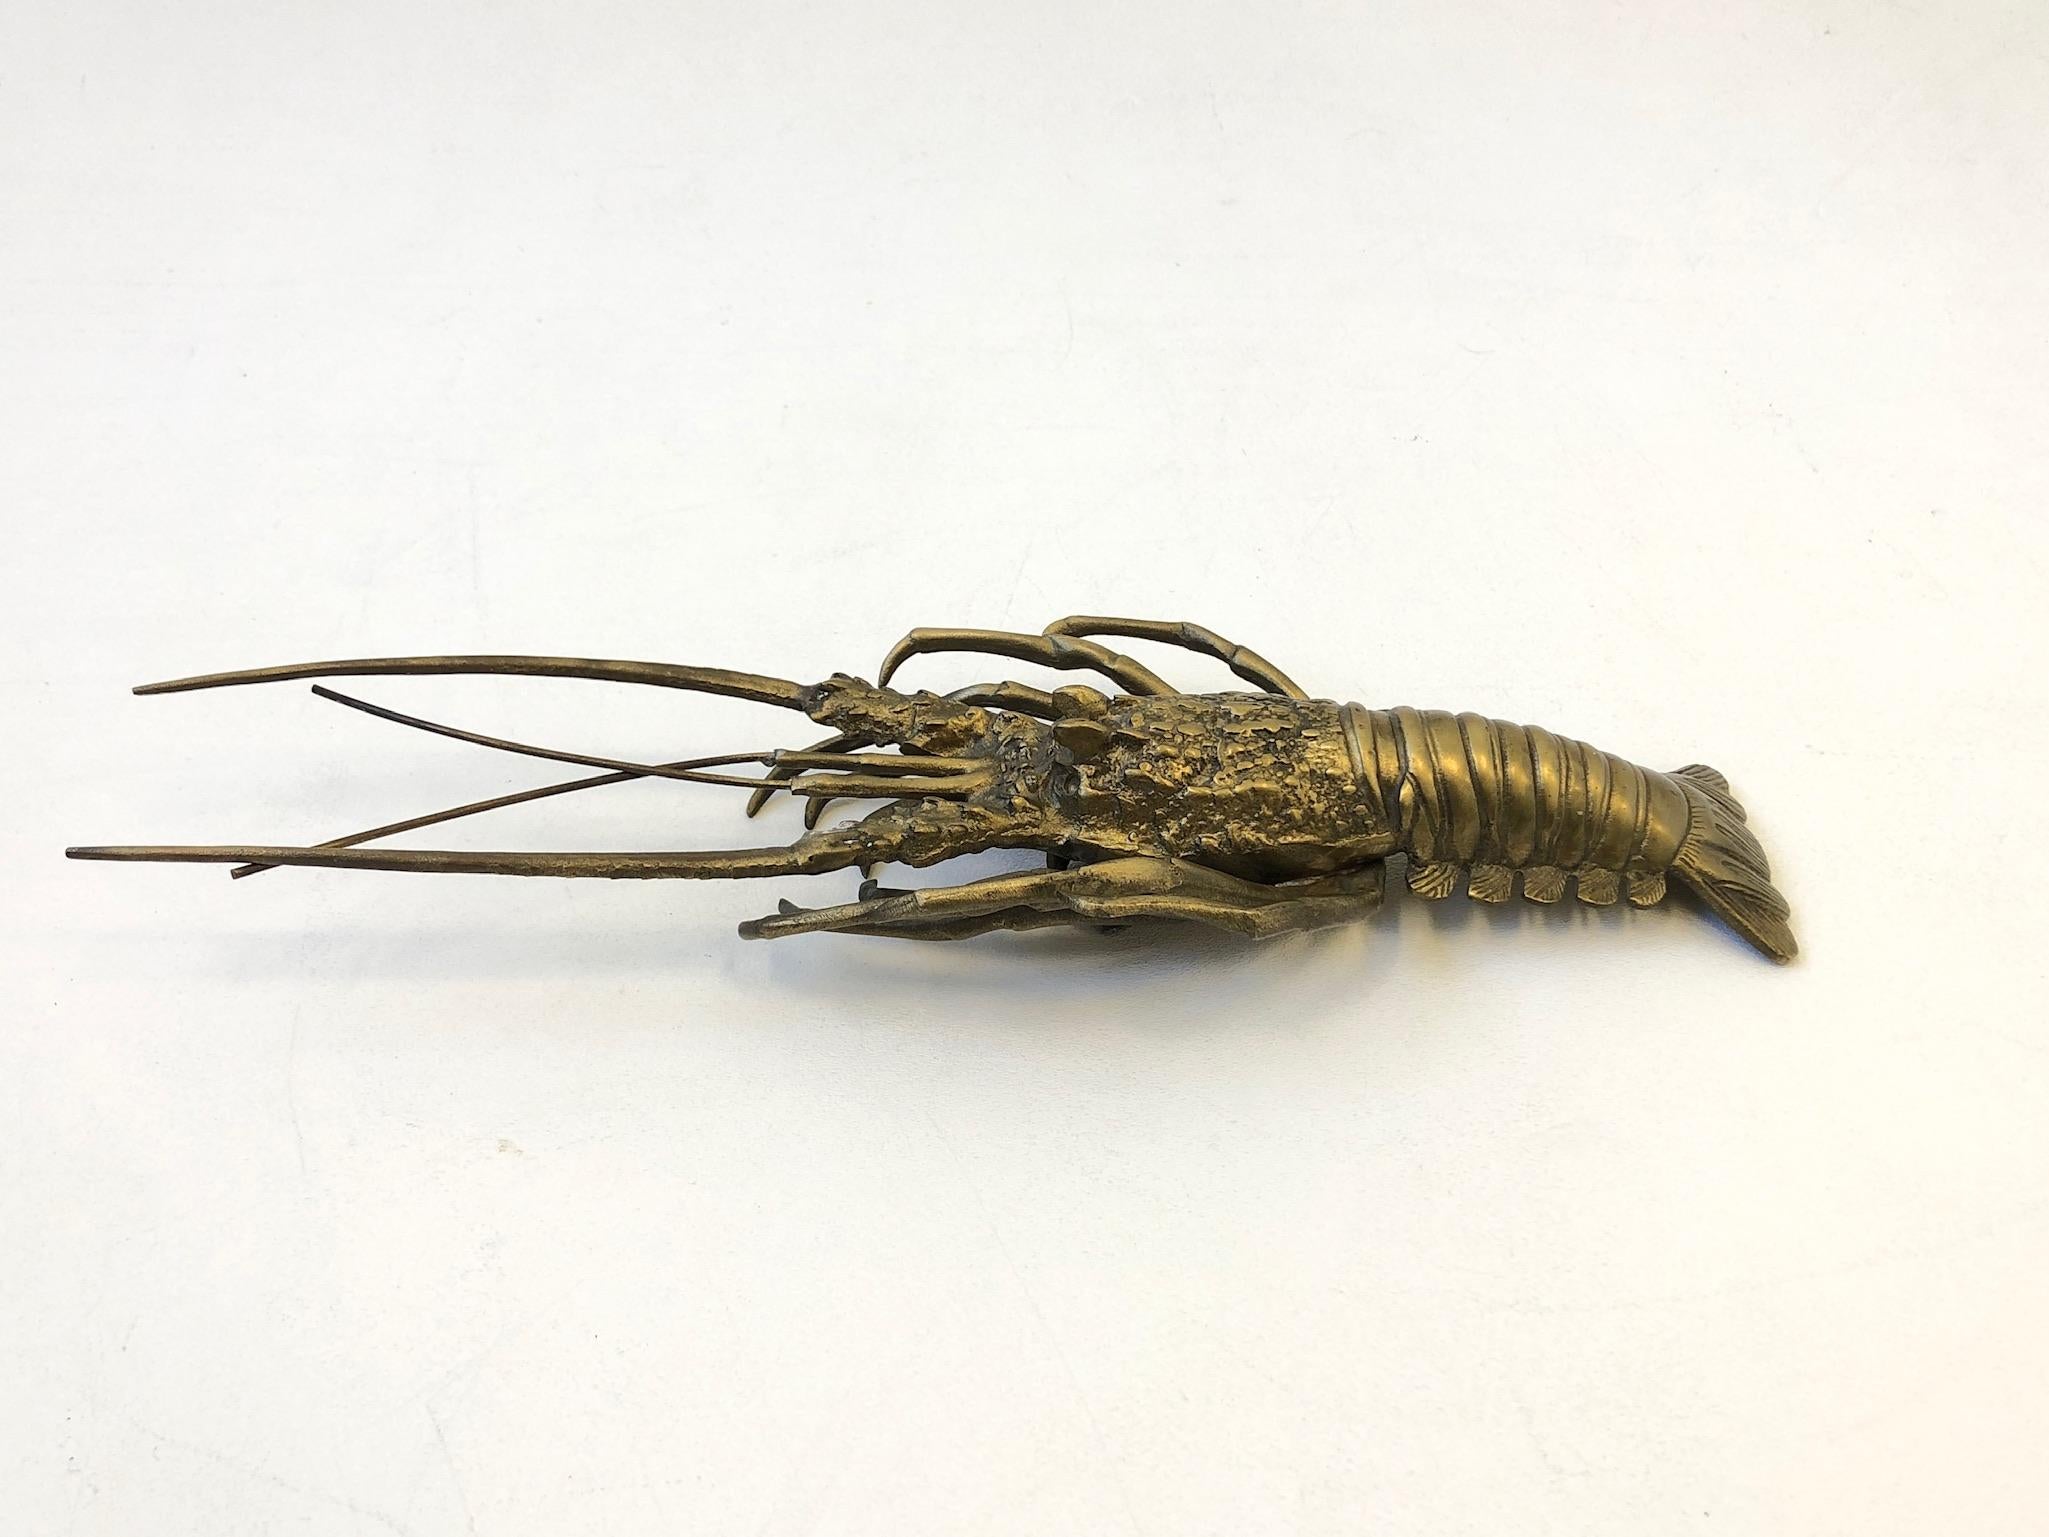 A cool 1970s solid brass lobster sculpture. 
Dimensions: 5.5” deep 16” wide 2” high.